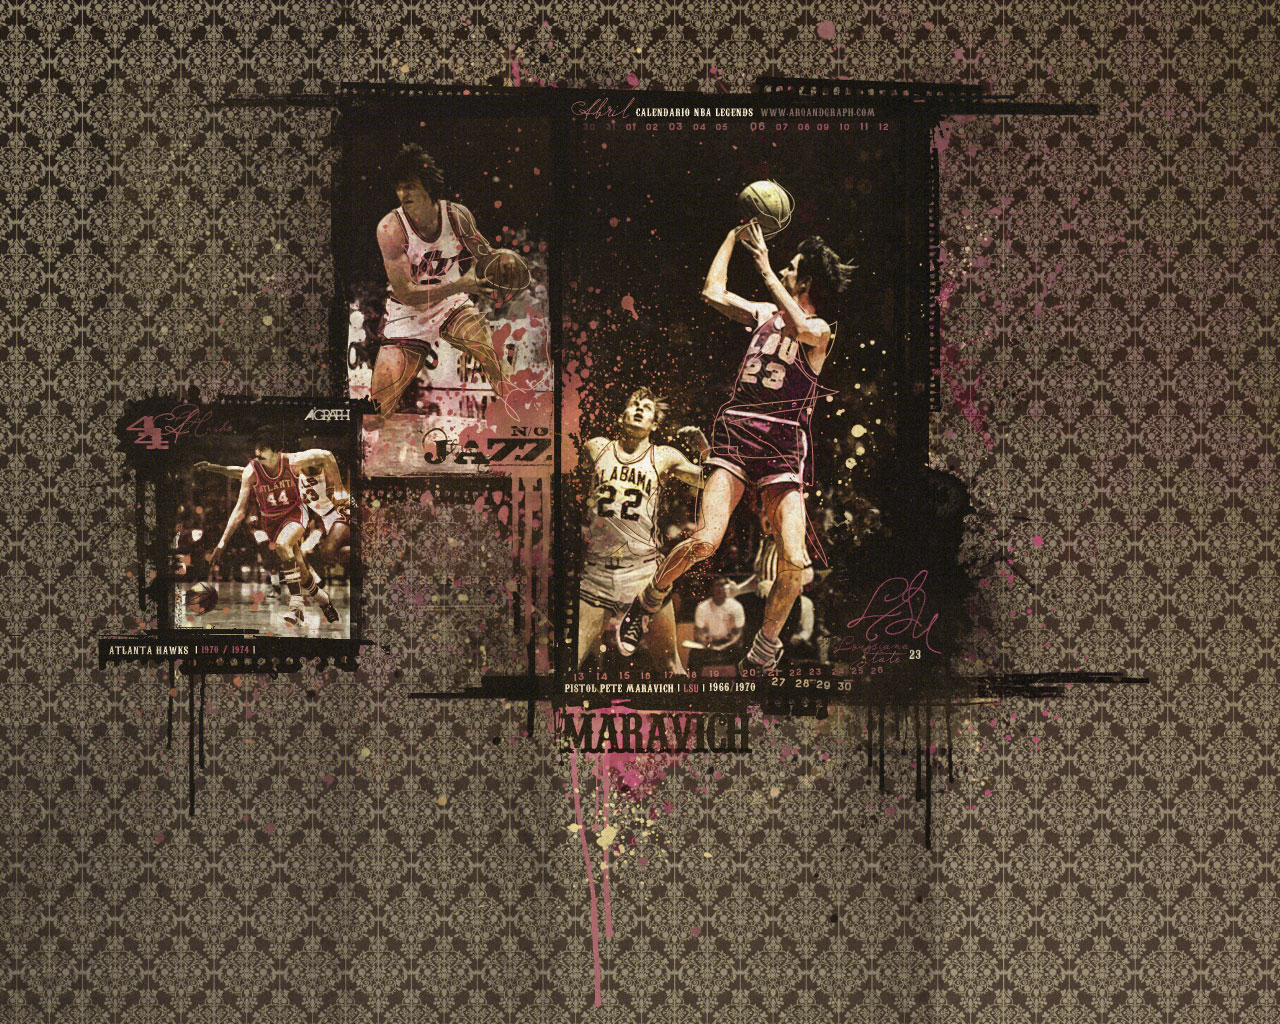  Pete Maravich, i'm adding to site :) and this wallpaper is calendar for 